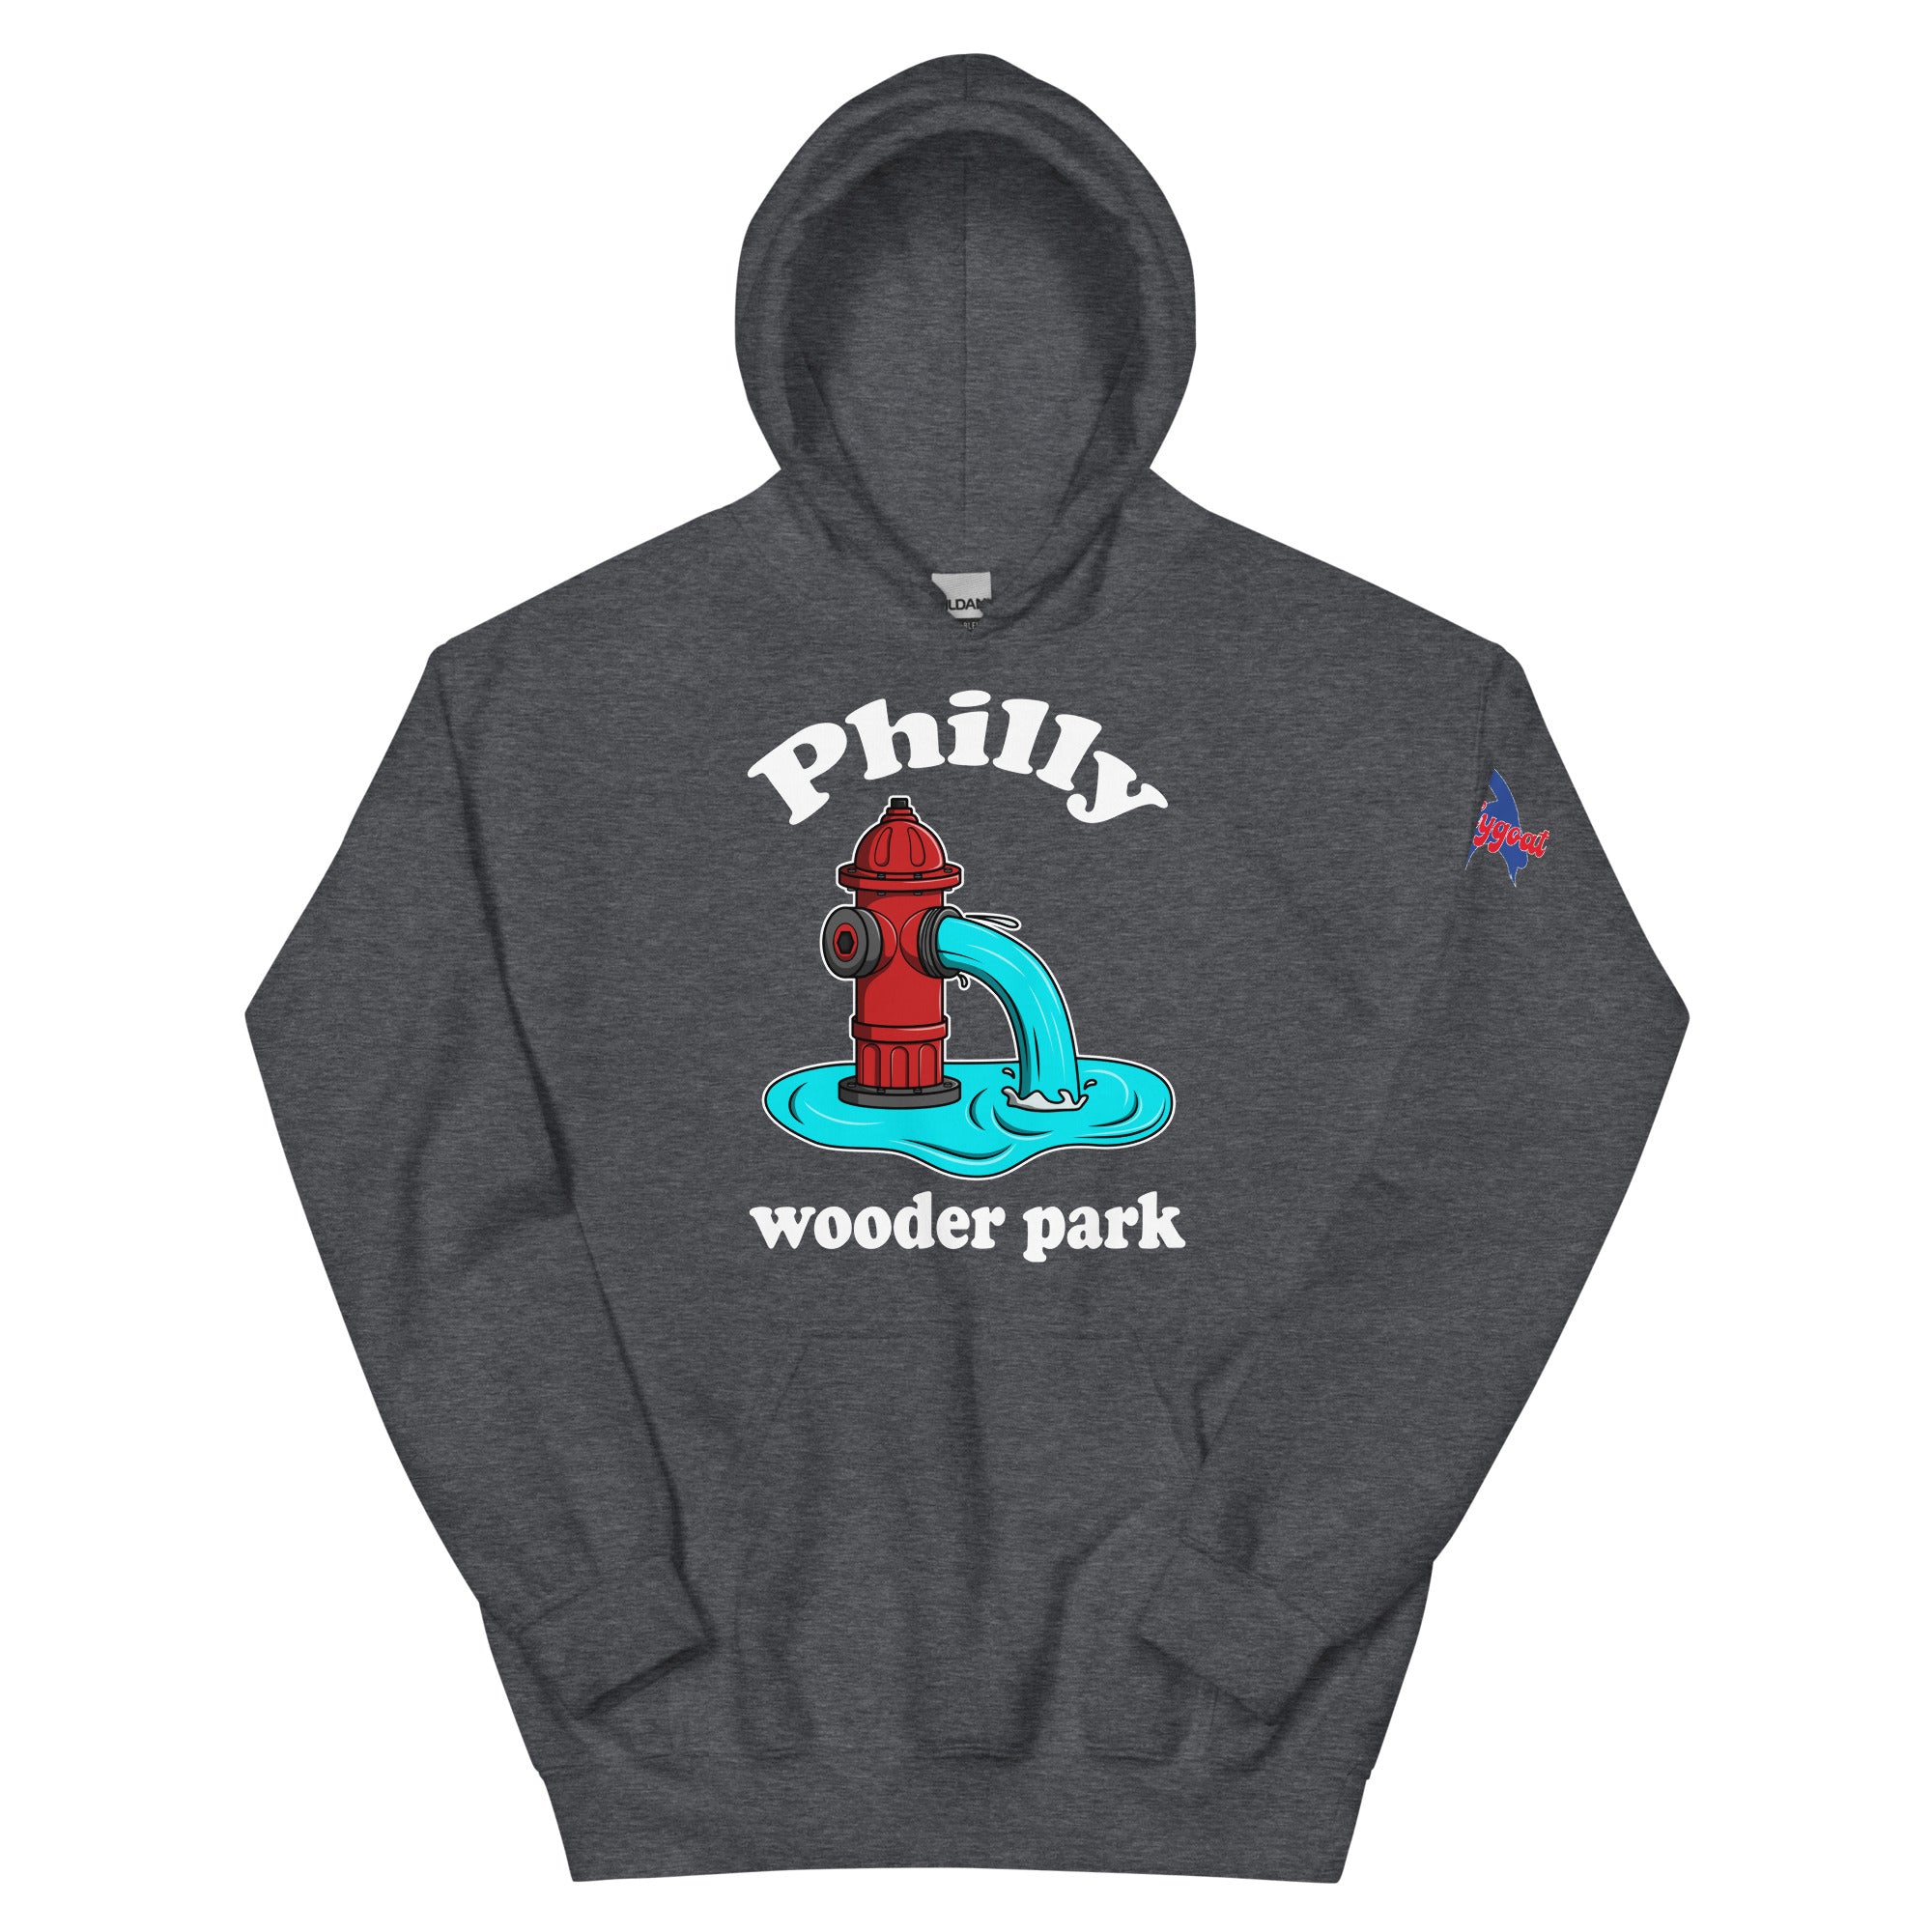 Philadelphia Philly wooder park water park fire hydrant funny sport heather grey hoodie from Phillygoat